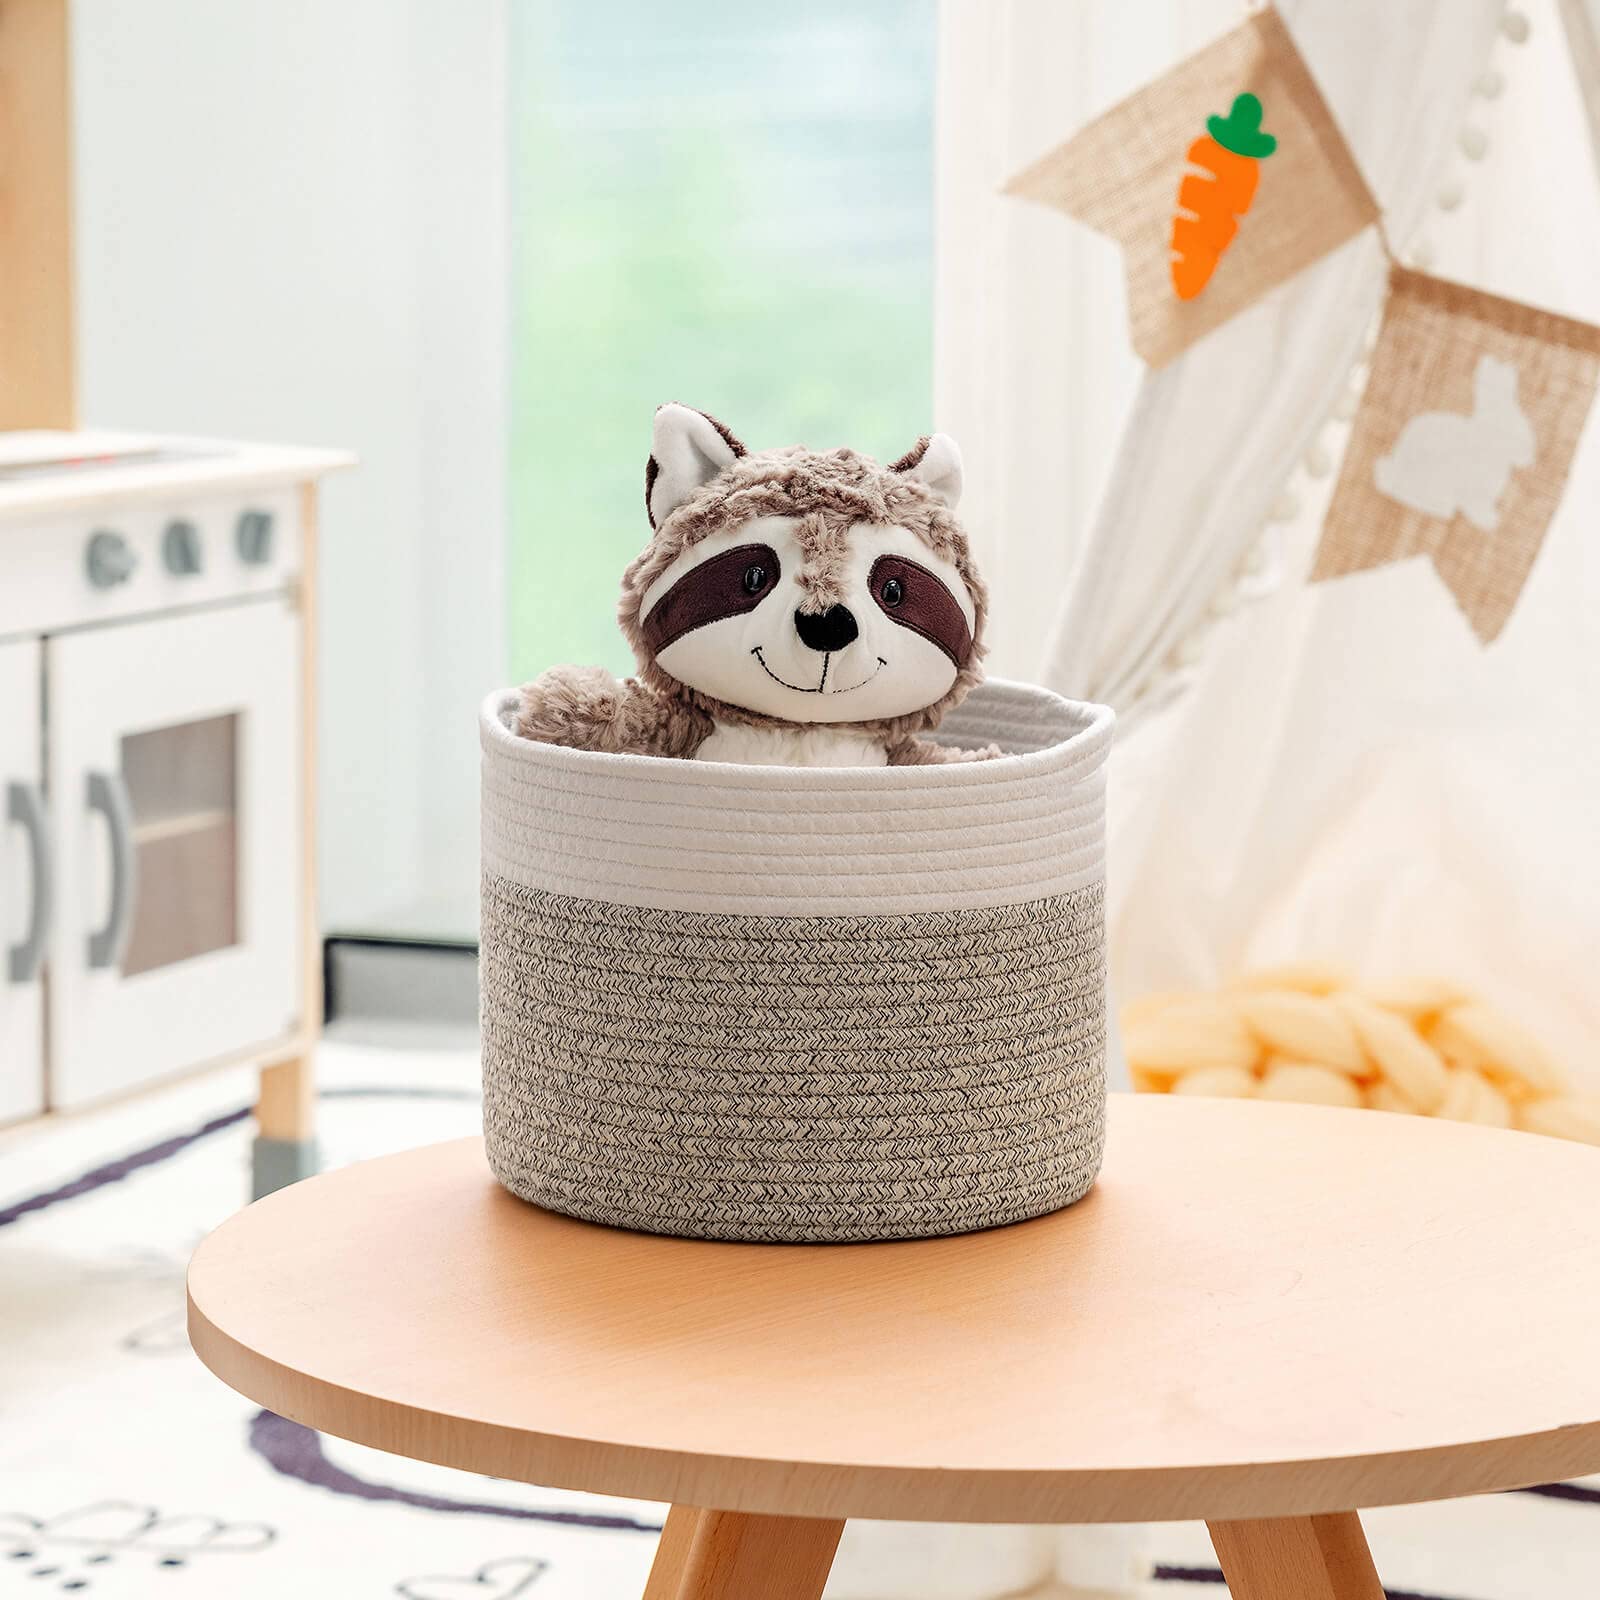 INDRESSME Small Woven Storage Basket, 9.4 x 7.1 inches, Small Round Rope Basket with Handles, Dog Toy Basket, Small Laundry Basket for Organizing, Small Toy Basket for Gifts Empty